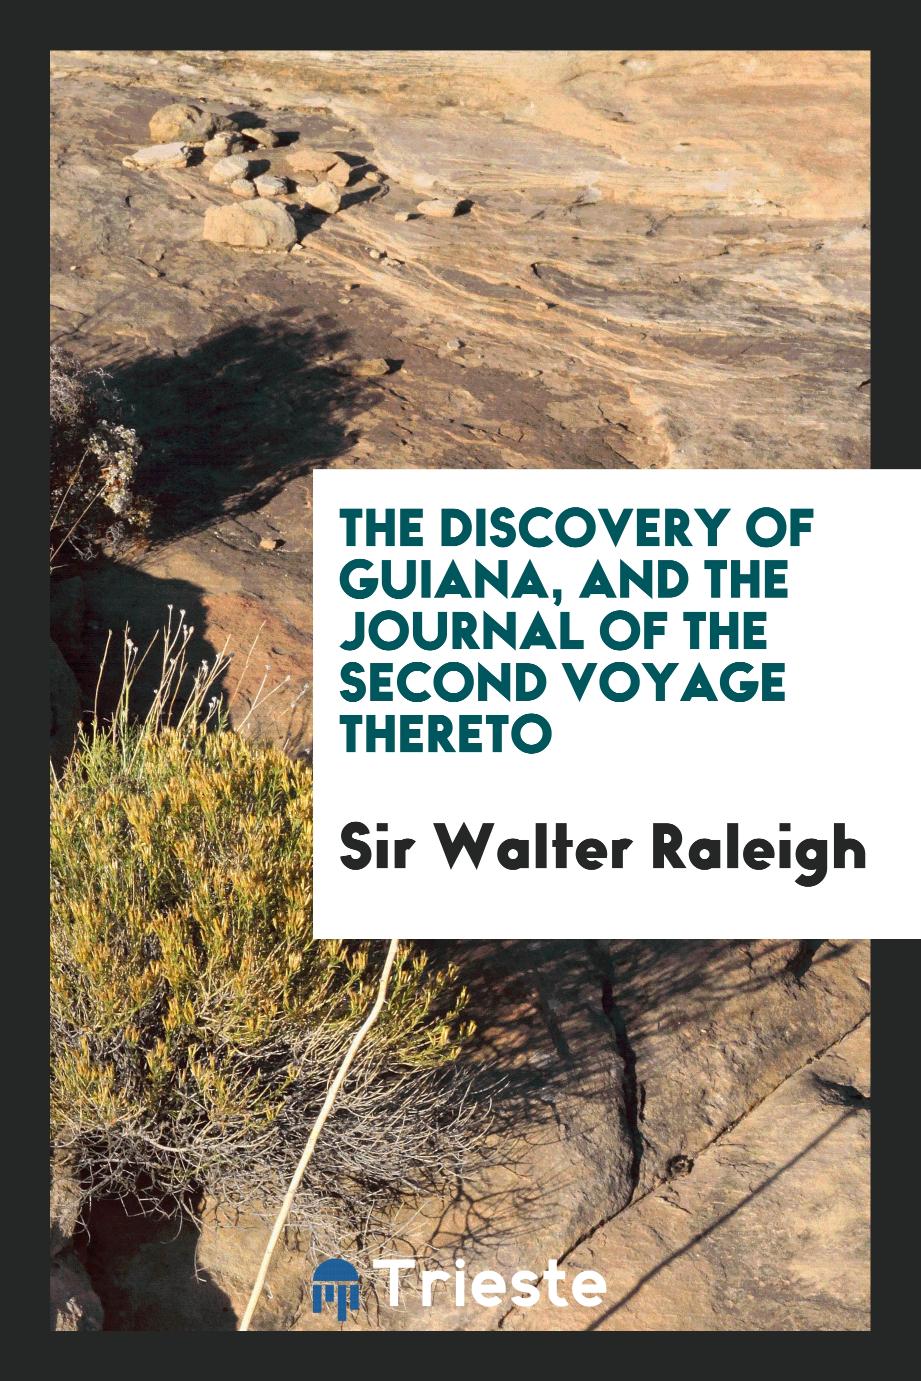 The discovery of Guiana, and the journal of the second voyage thereto